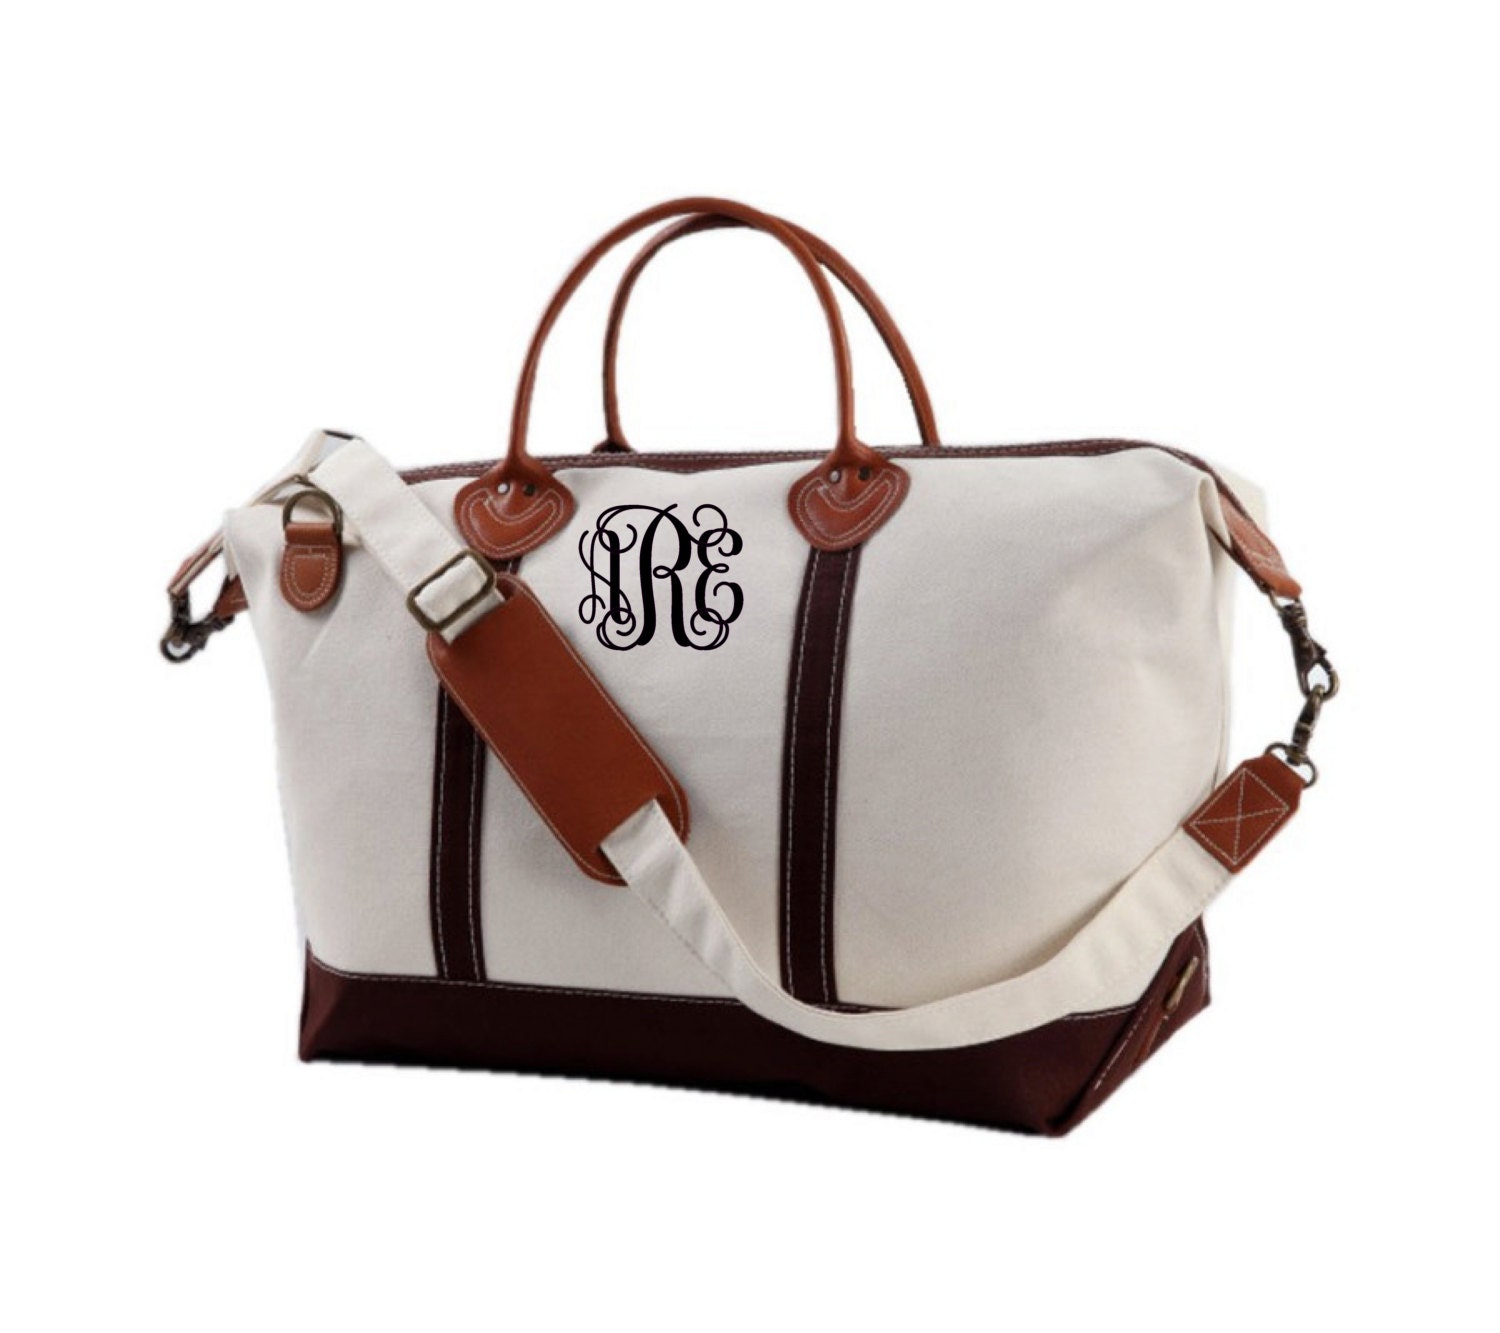 MONOGRAMMED DUFFLE large canvas by GameDayGirlsandGifts on Etsy